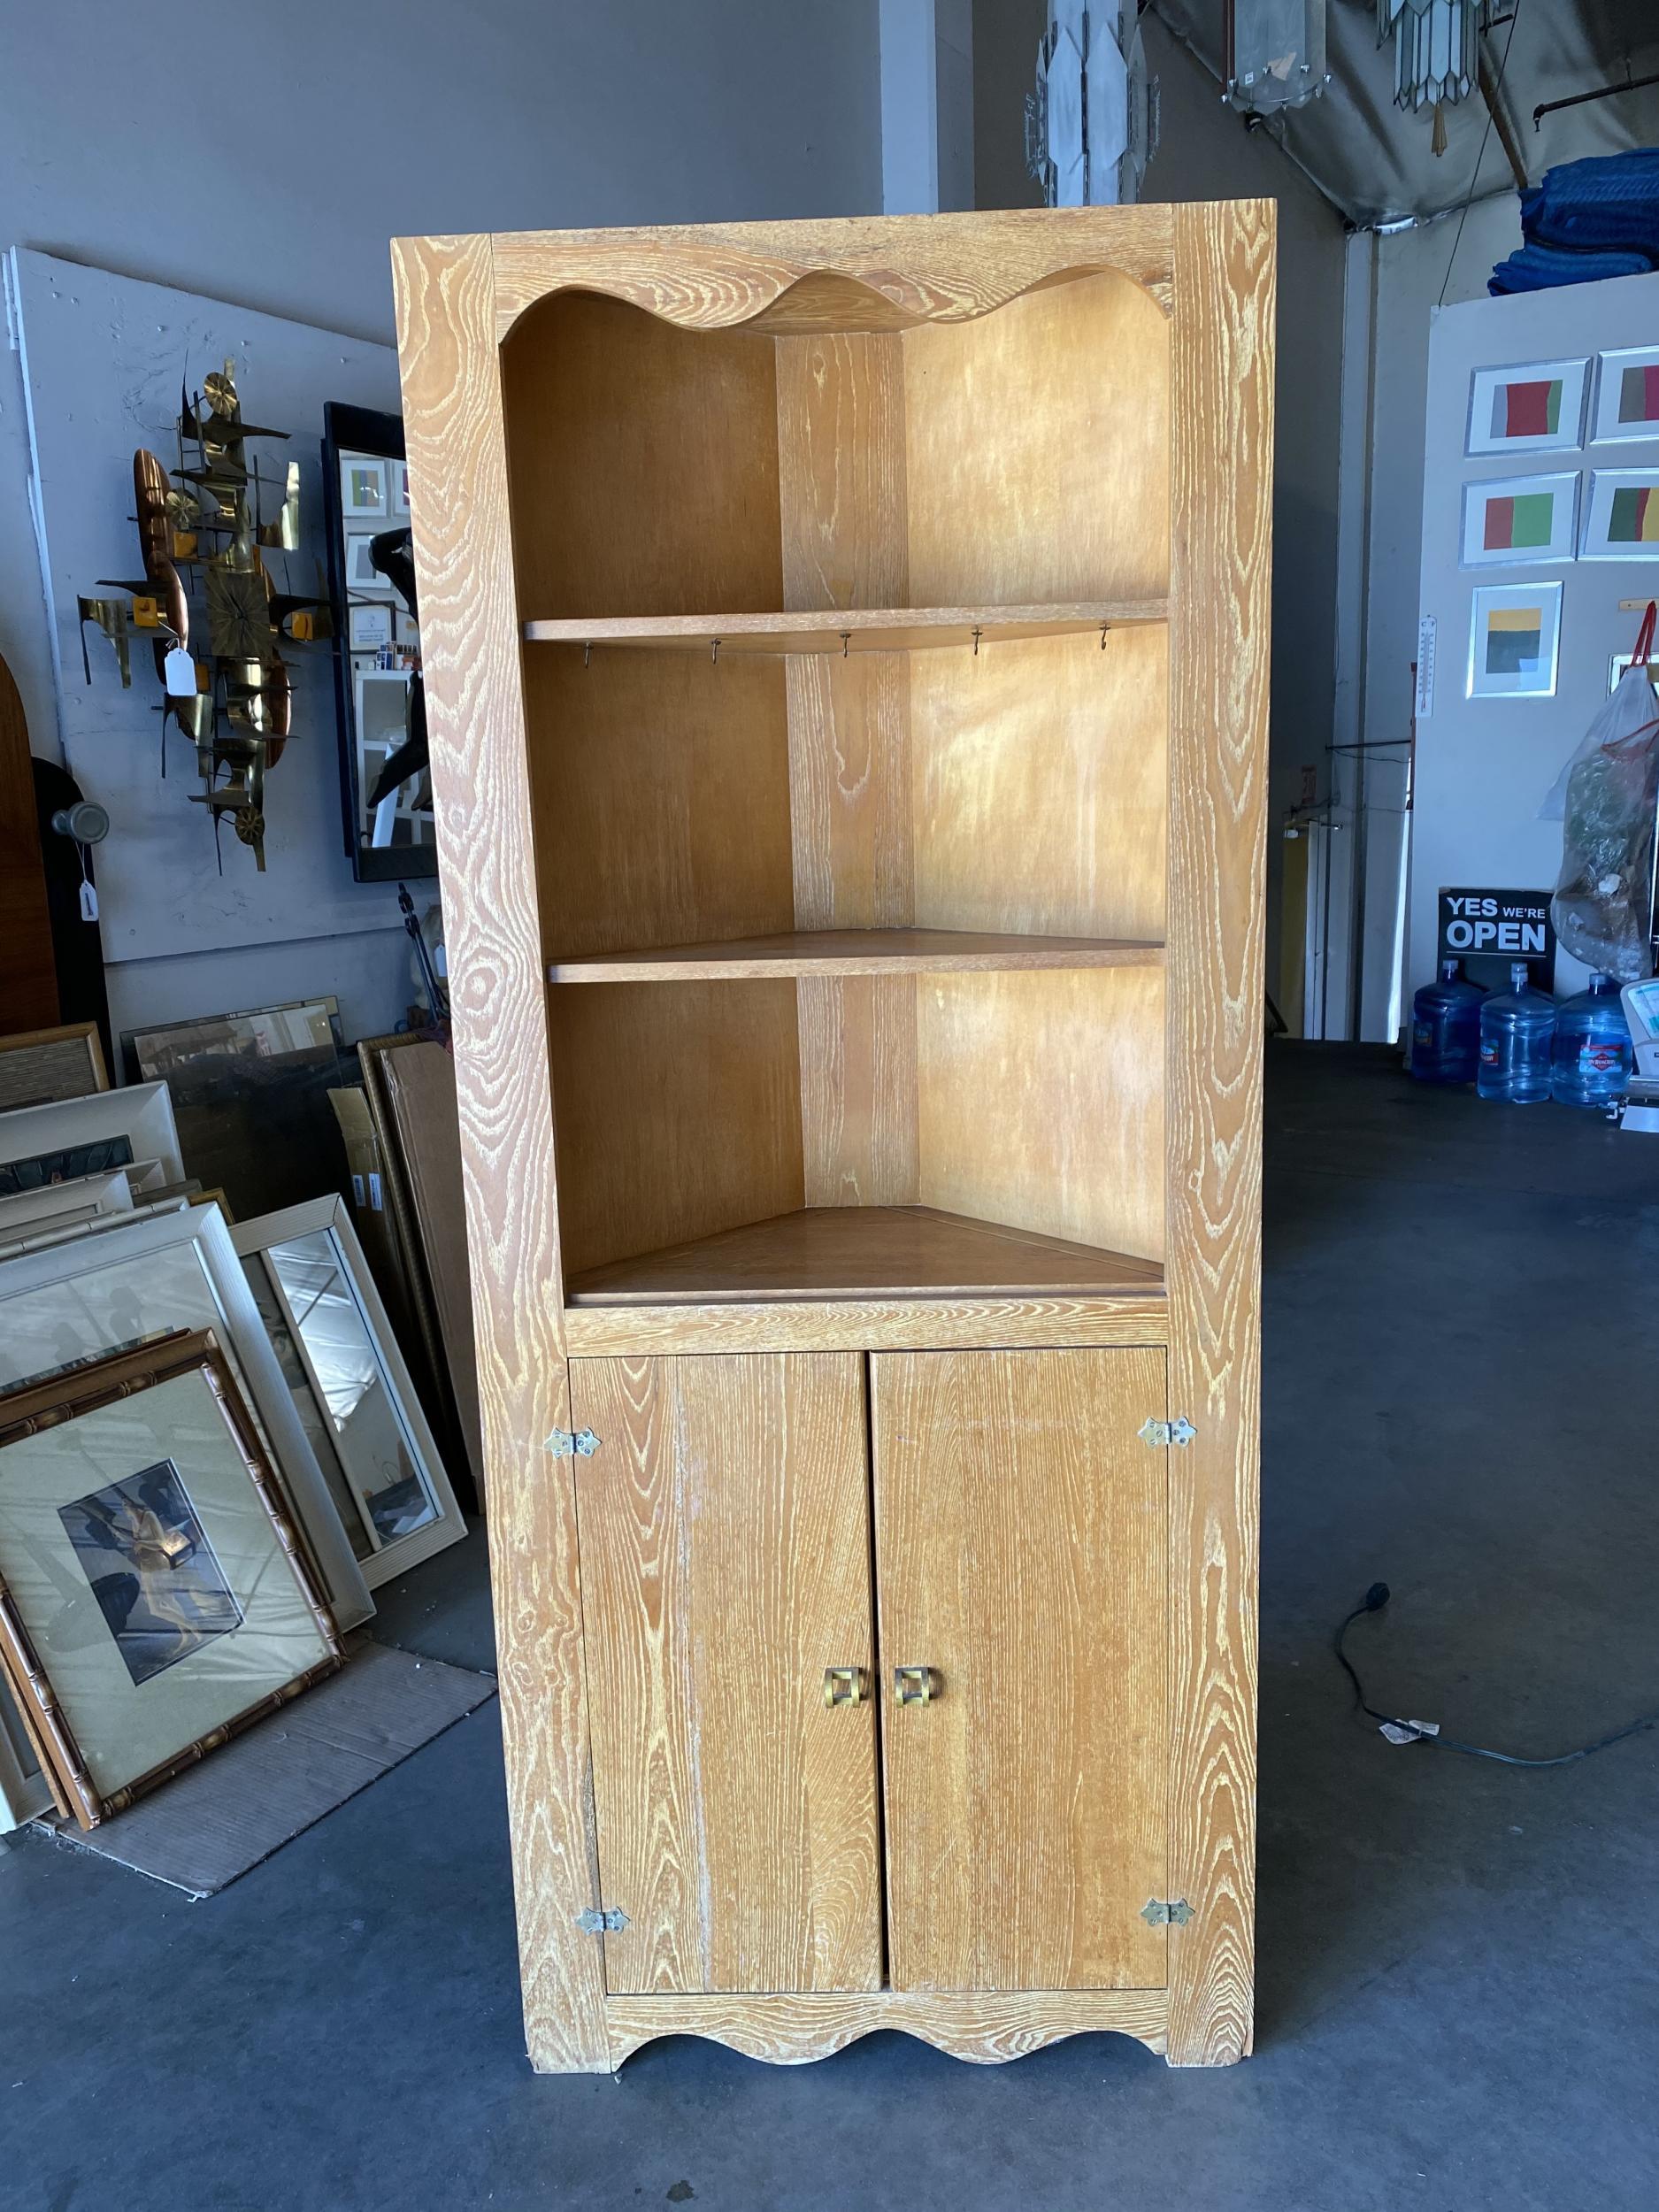 Art Deco era oak corner cupboard cabinet with 3 fixed shelves and double door cabinet underneath. 
The measurement of length of the sides to the endpoint is 18.5 inches, top center to the corner, 13.25 inches.  